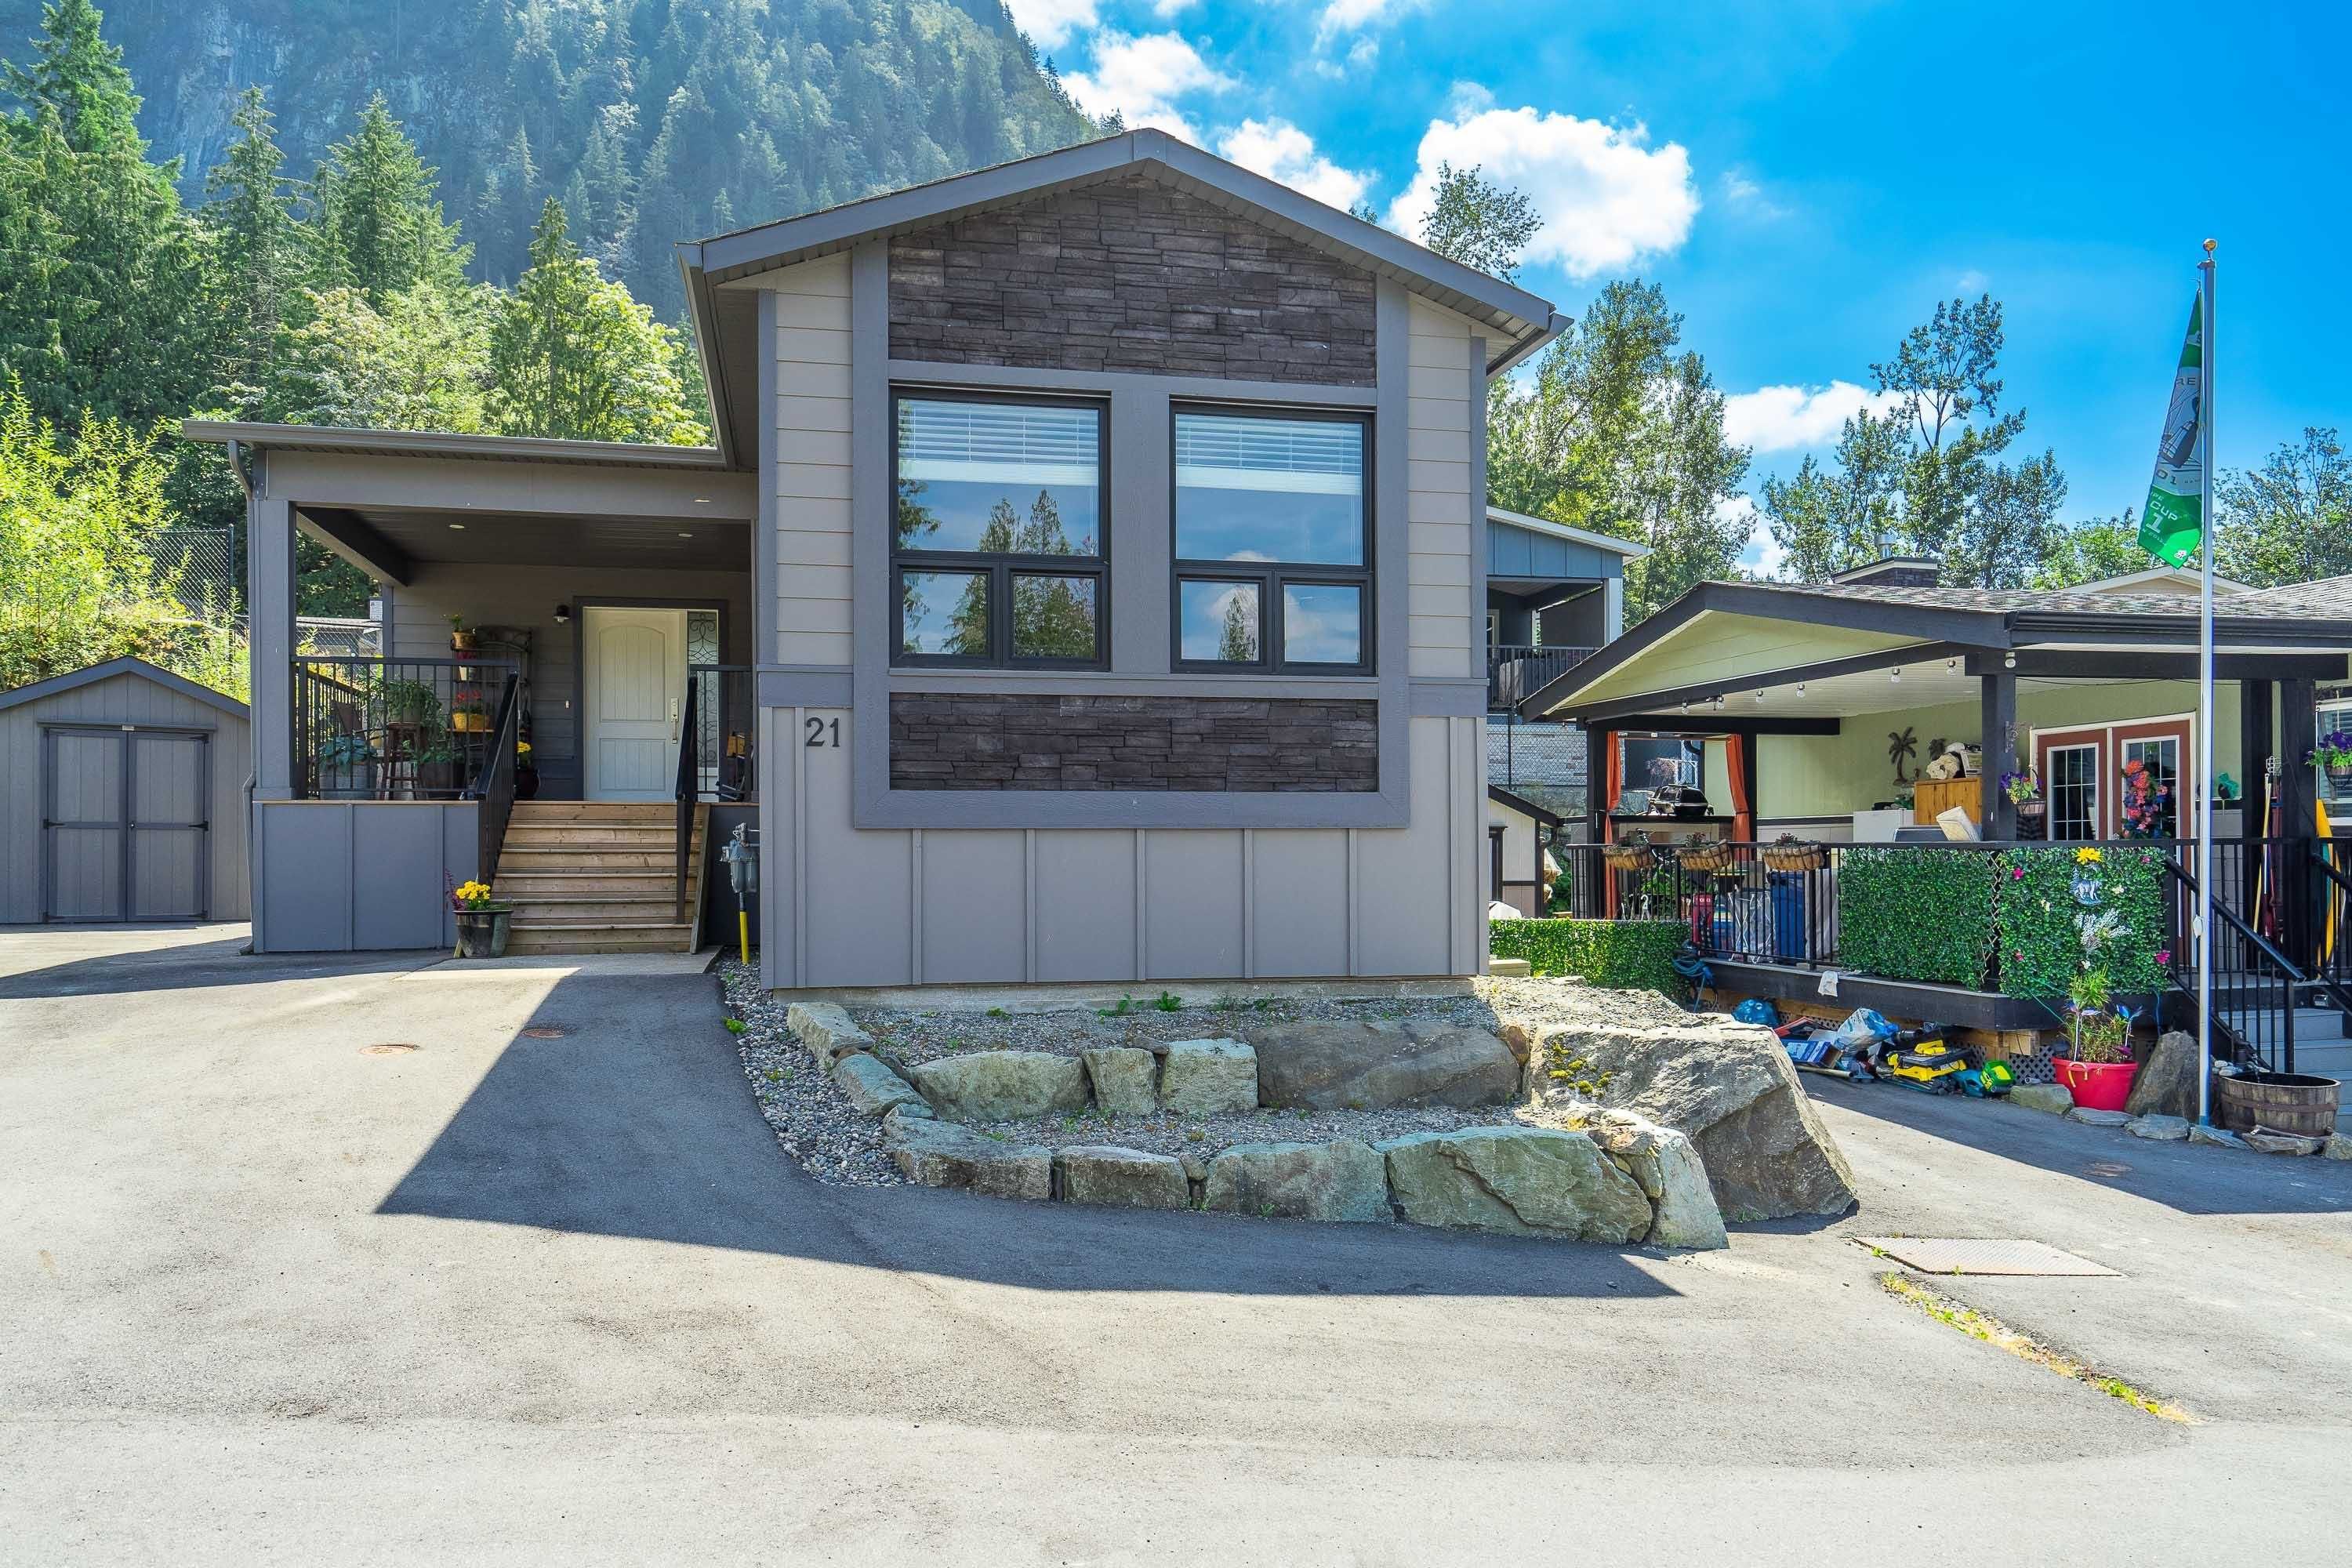 I have sold a property at 21 53480 BRIDAL FALLS RD in Chilliwack
